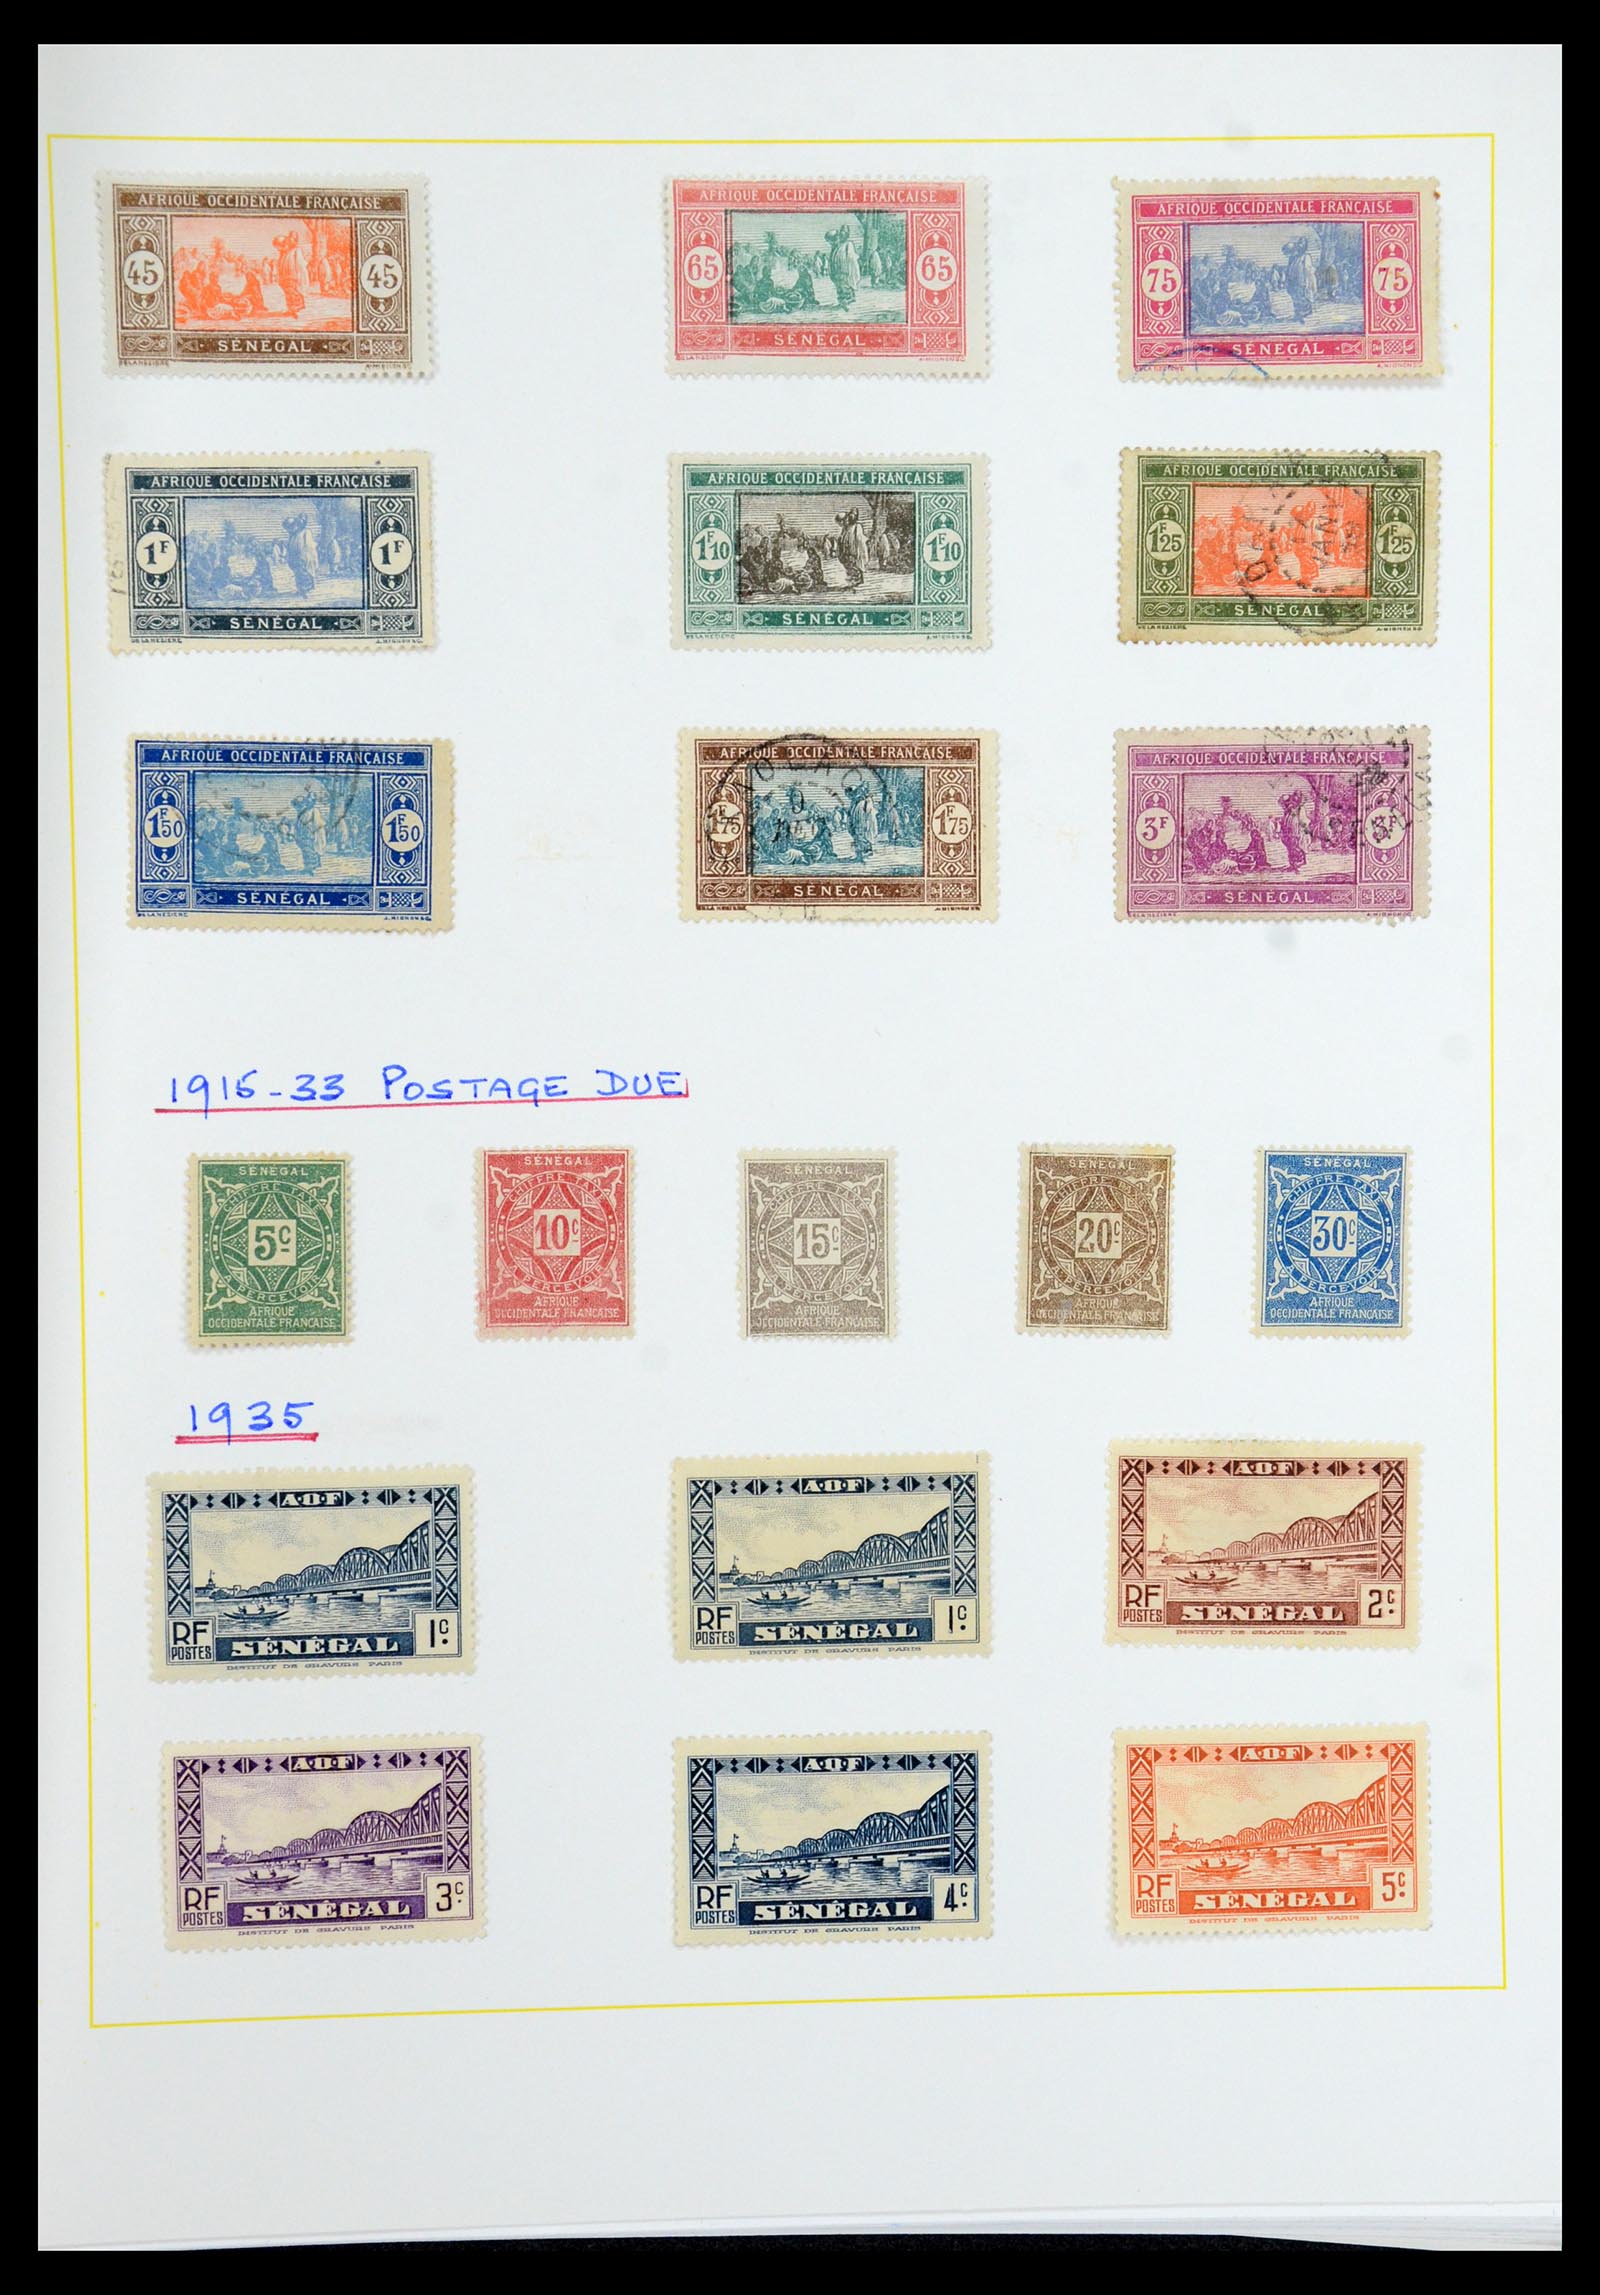 36099 251 - Stamp collection 36099 French coonies 1885-1950.